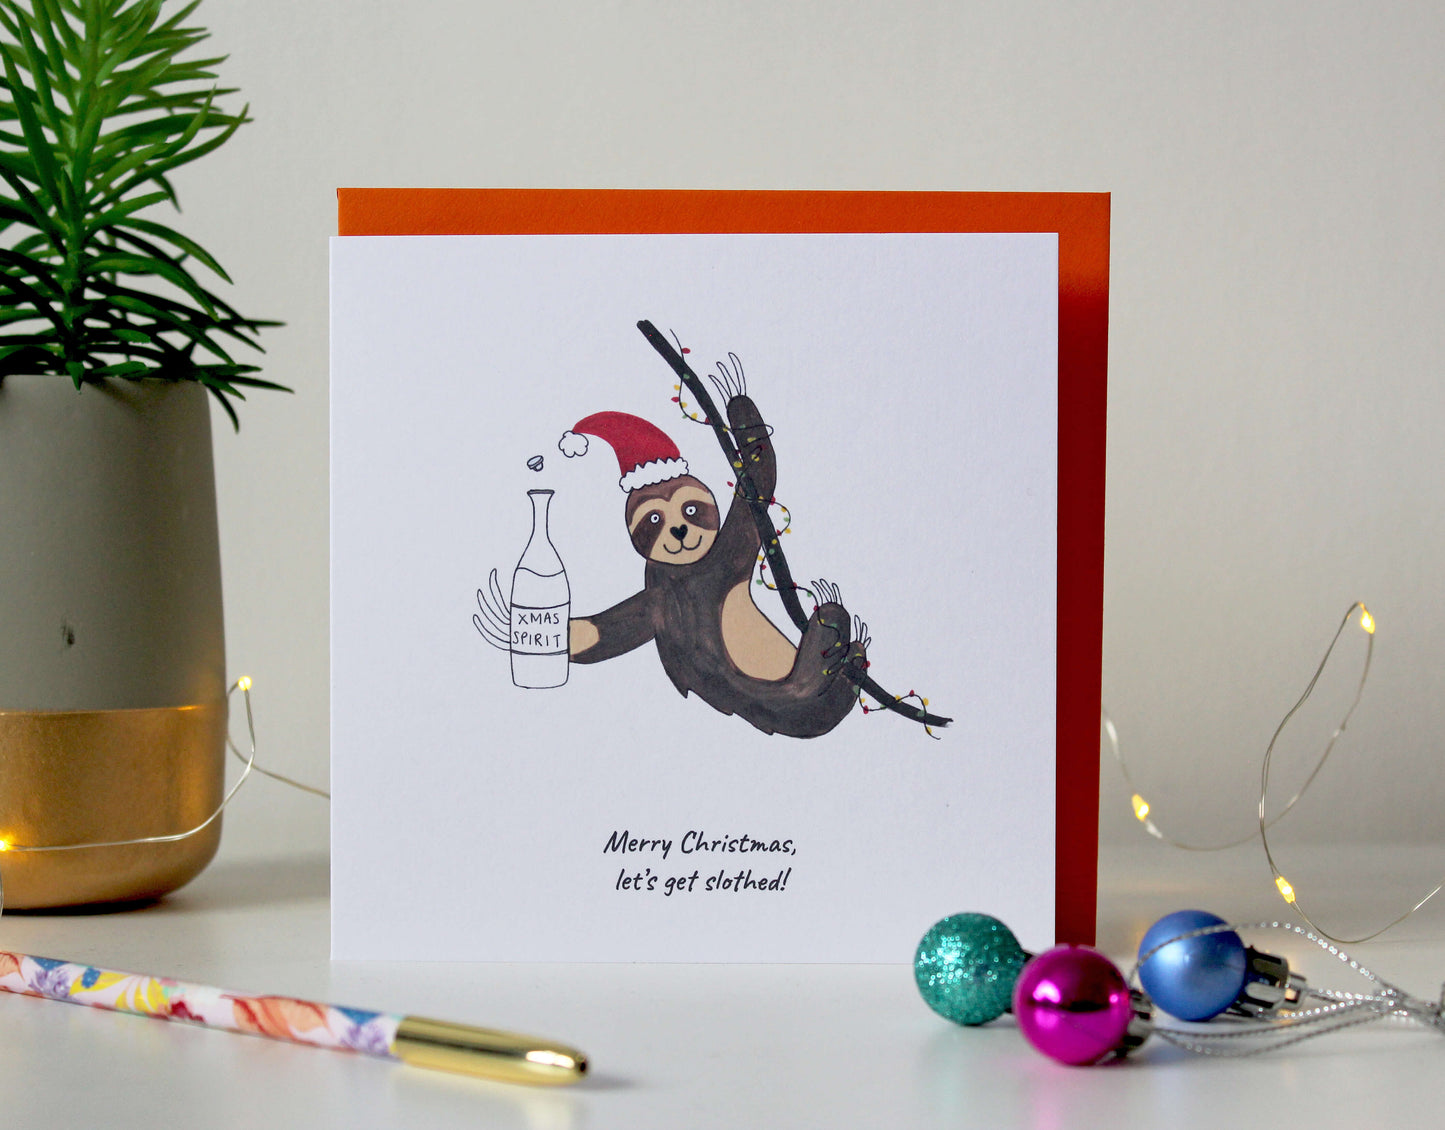 Funny Sloth Christmas card - 'Merry Christmas, Let's get slothed'